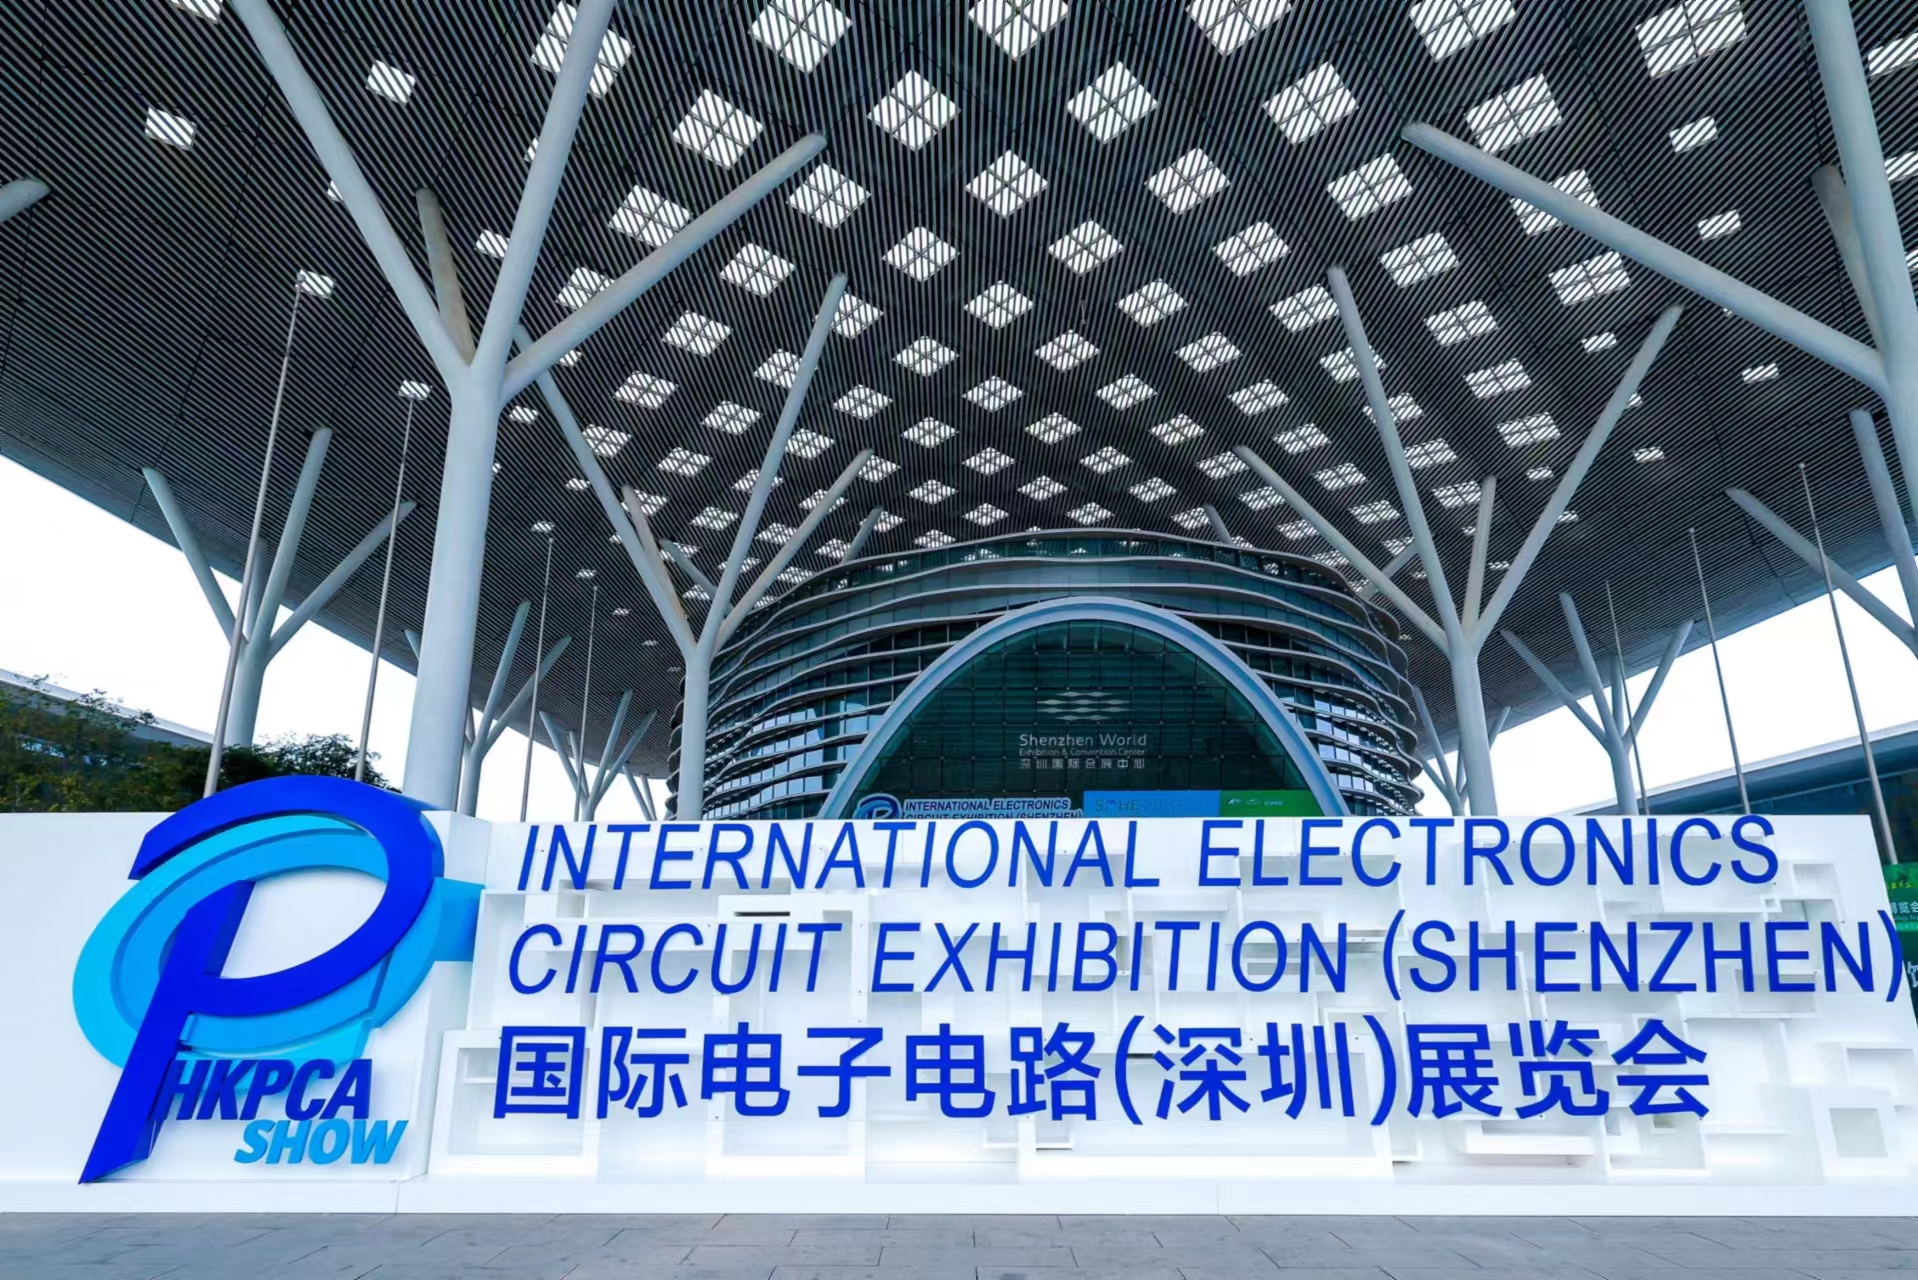 Initial information | International Electronics Circuit  Exhibition (Shenzhen) concluded successfully